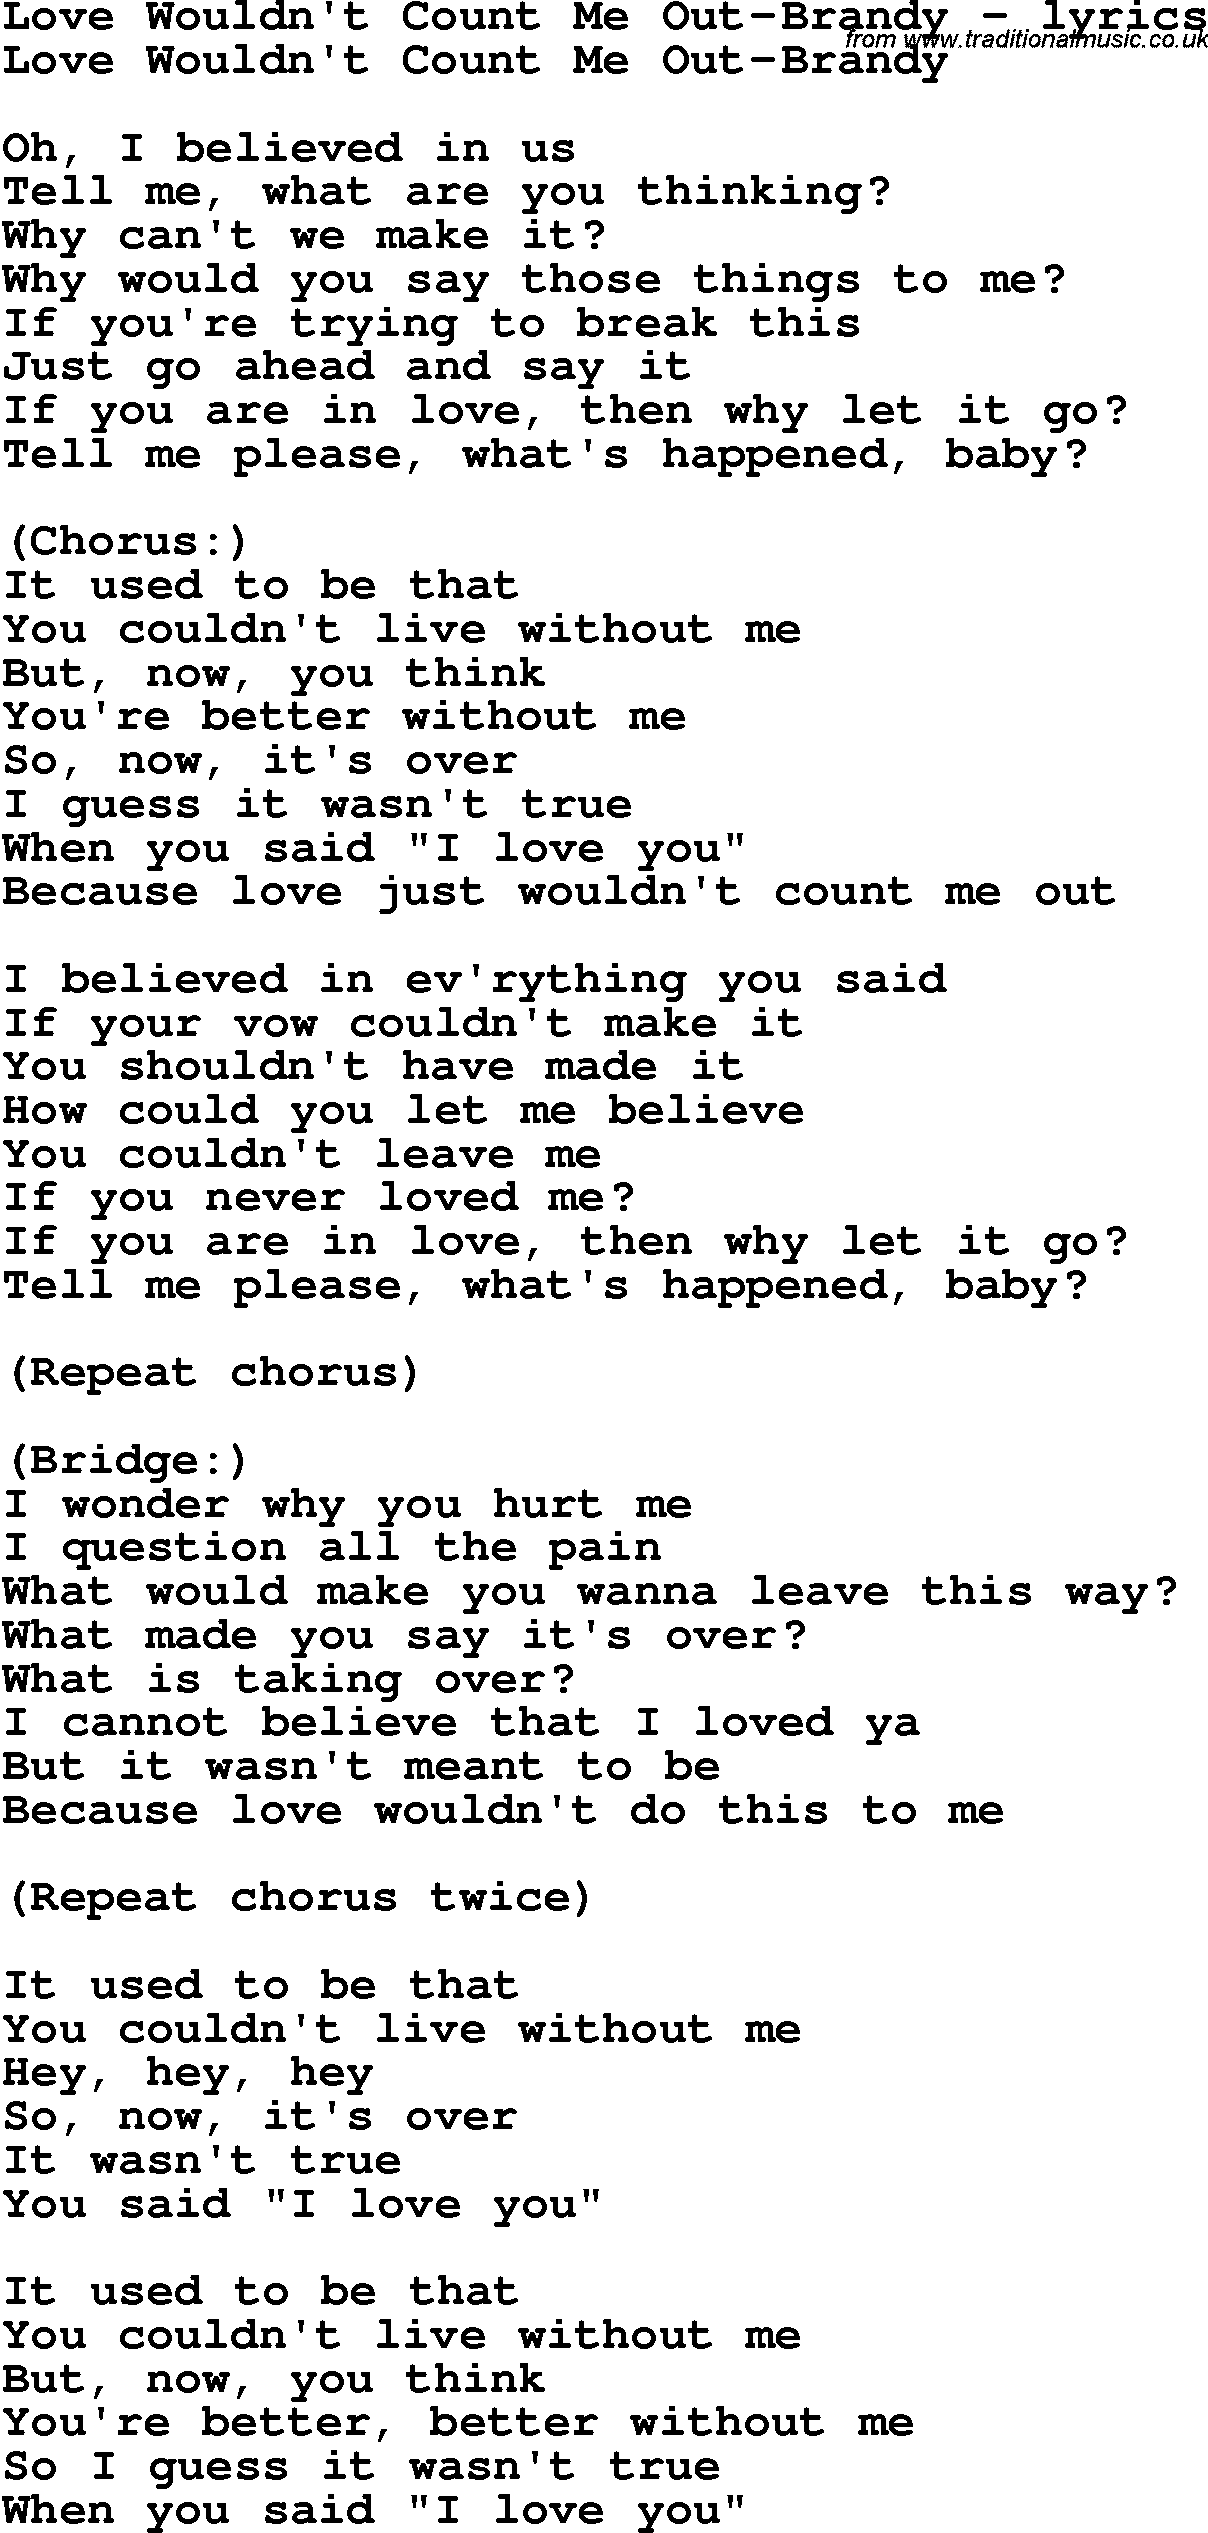 Love Song Lyrics for: Love Wouldn't Count Me Out-Brandy